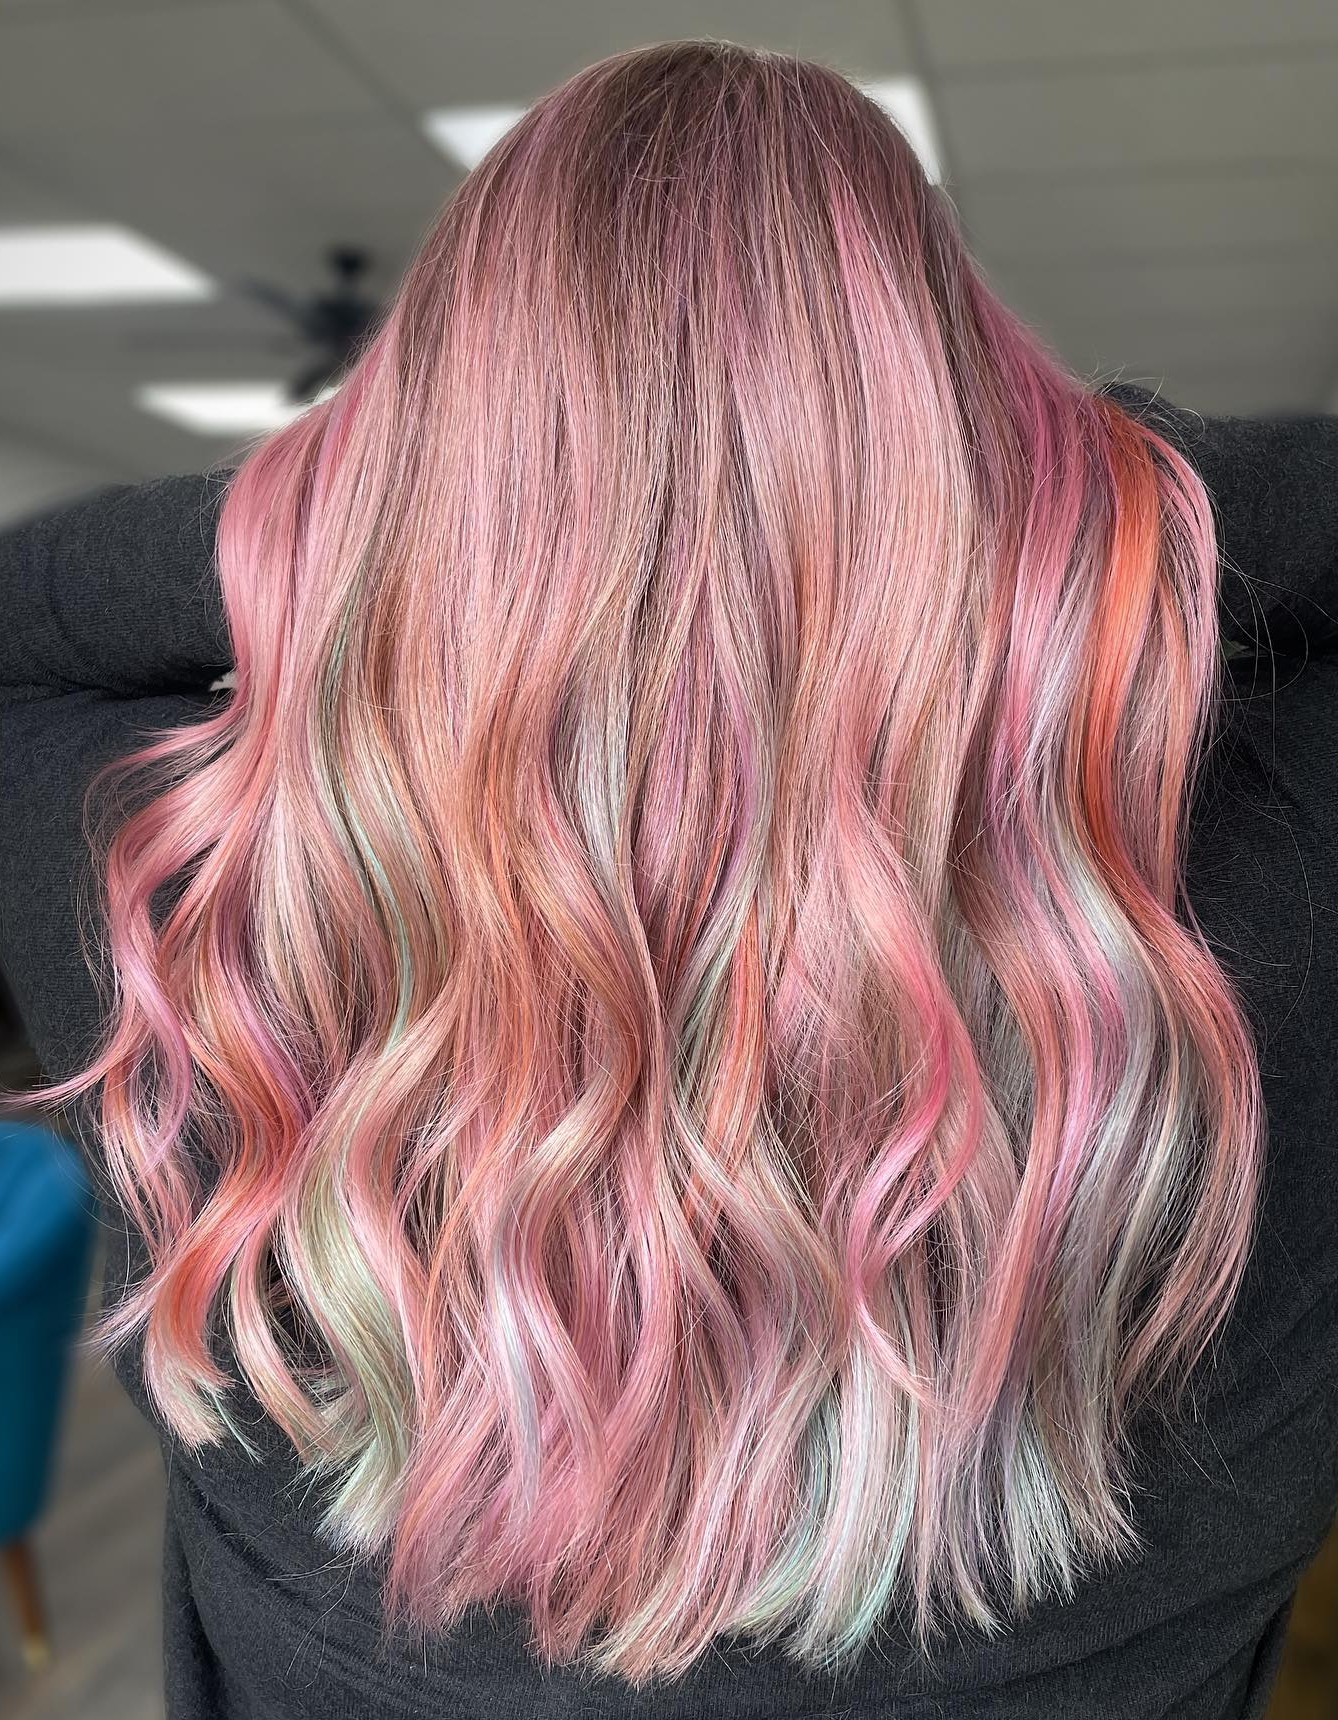 Long Rose Gold hair with Pastel Highlights